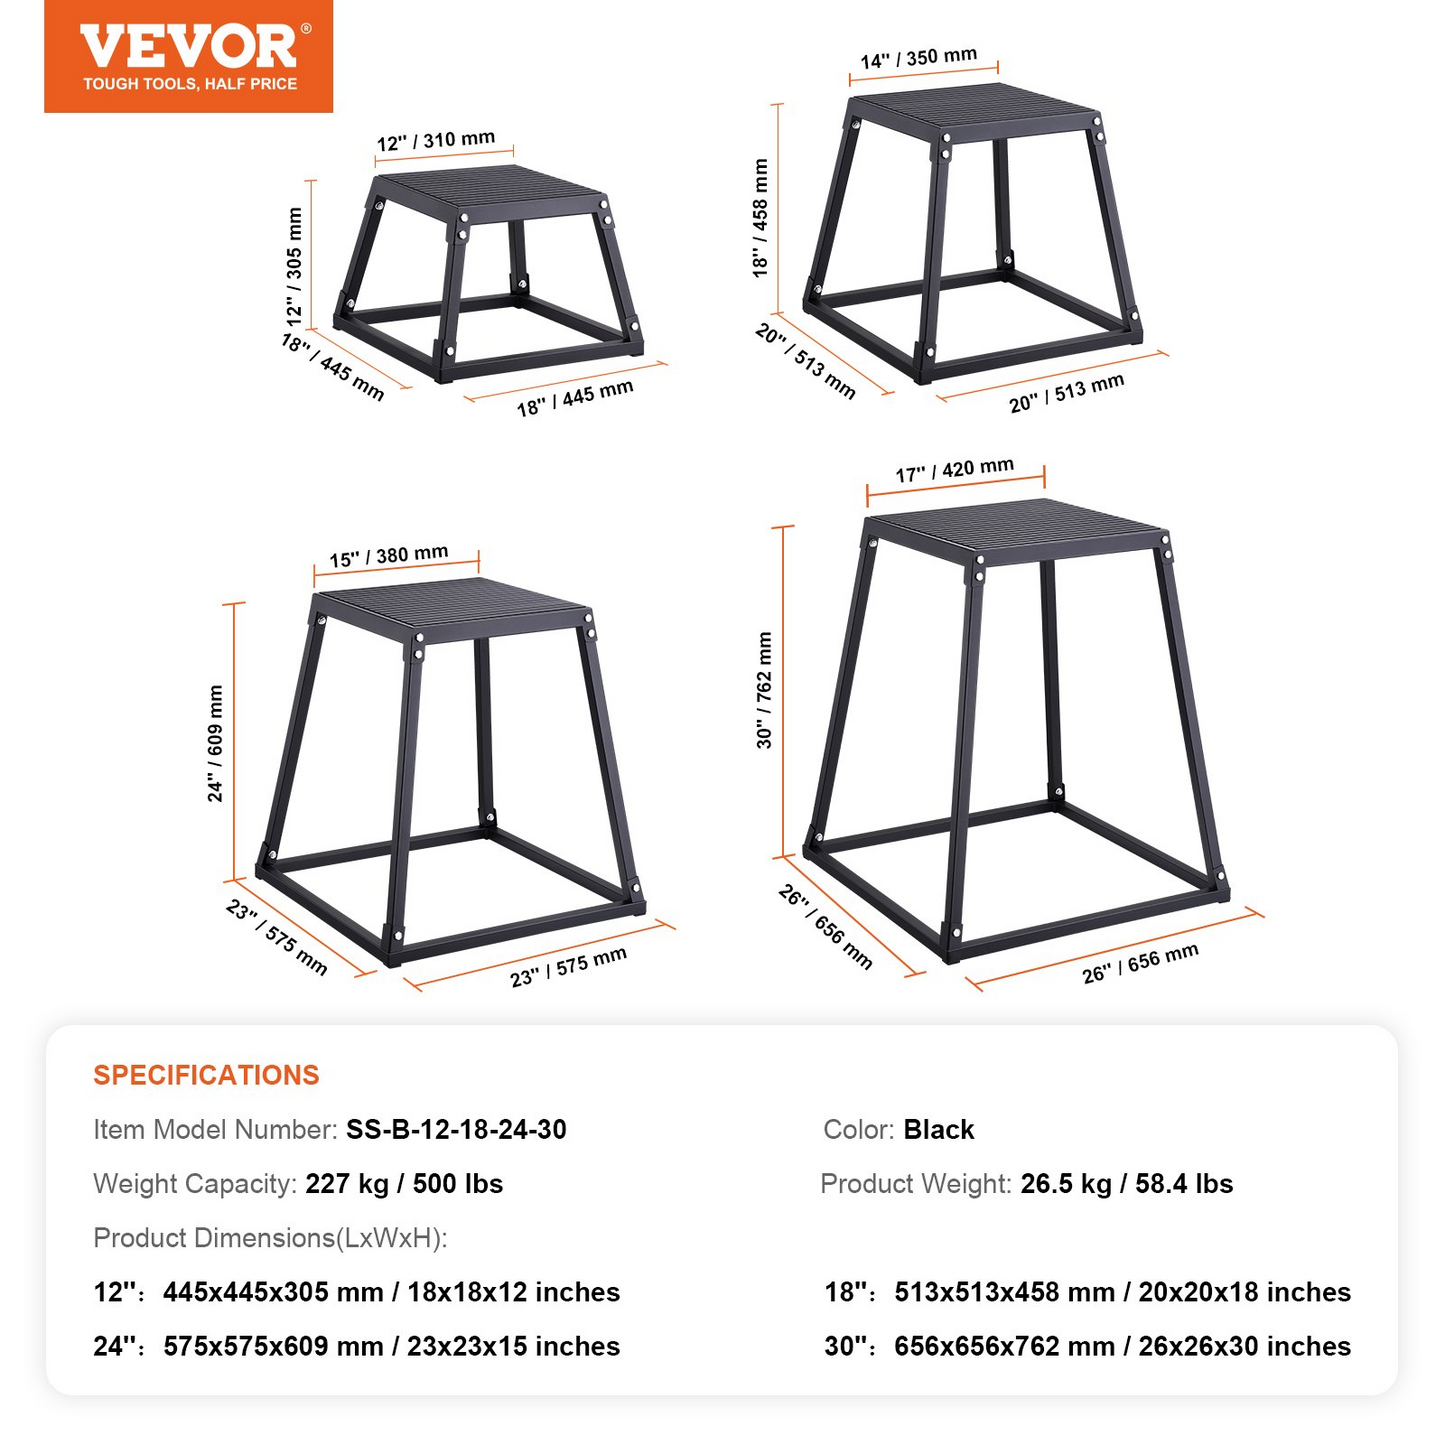 VEVOR Plyometric Jump Boxes - Improve Your Fitness and Strength Training, Goodies N Stuff